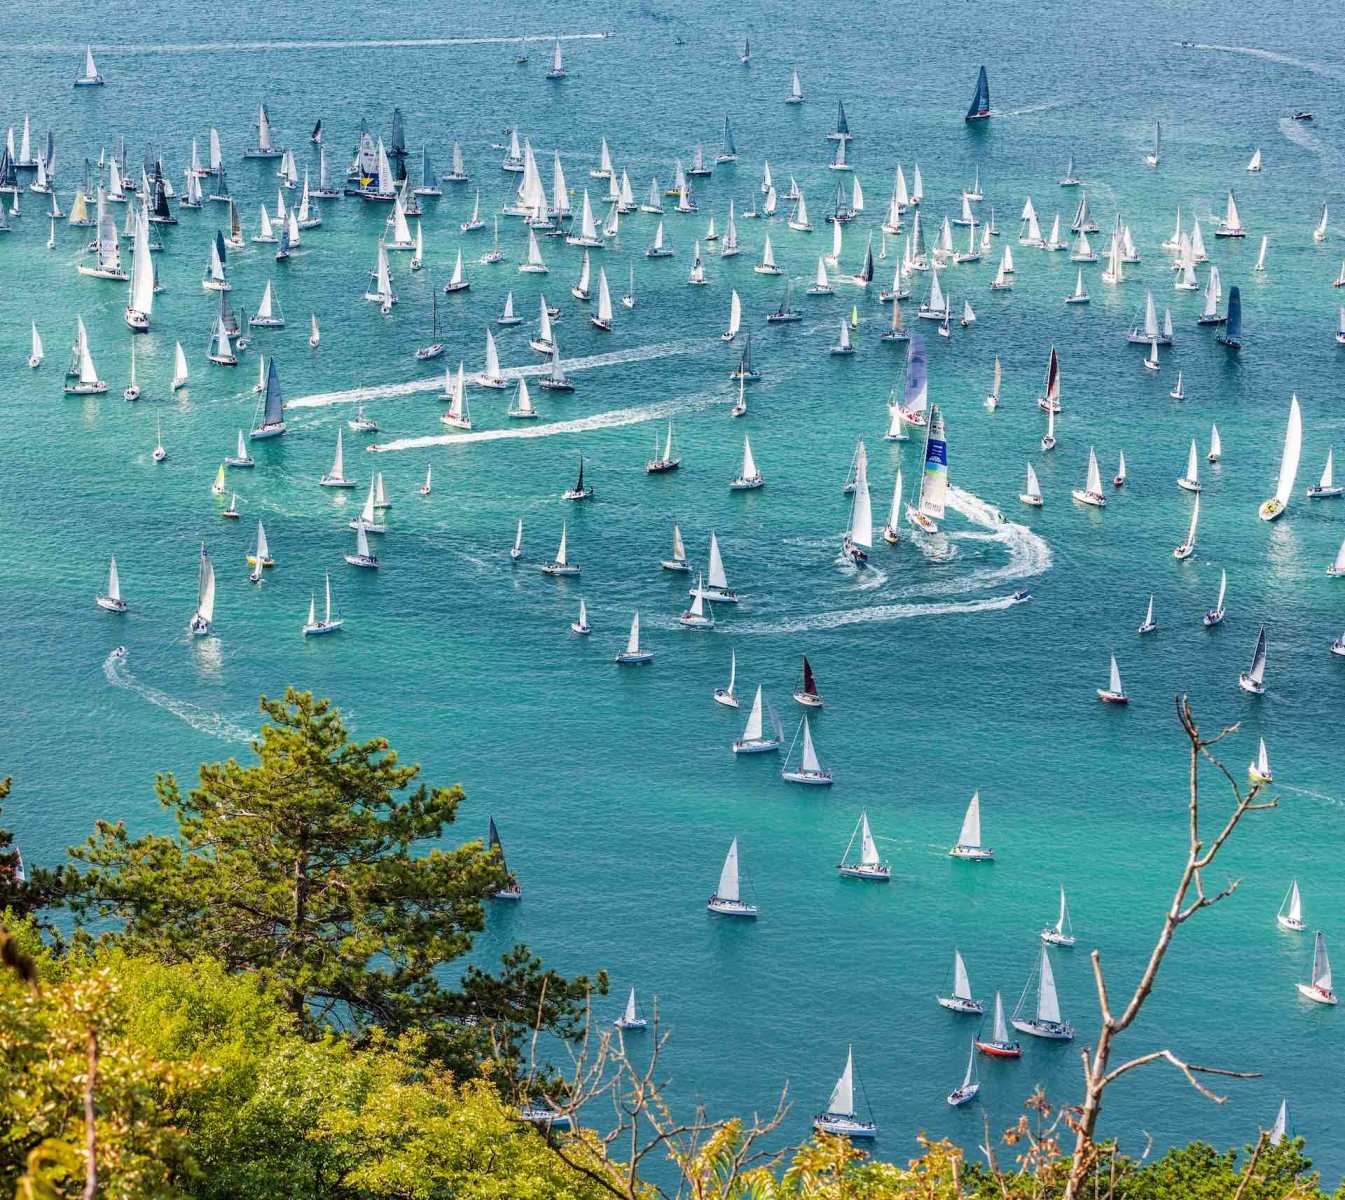 The gulf of Trieste and the fast race of the Barcolana in Italy